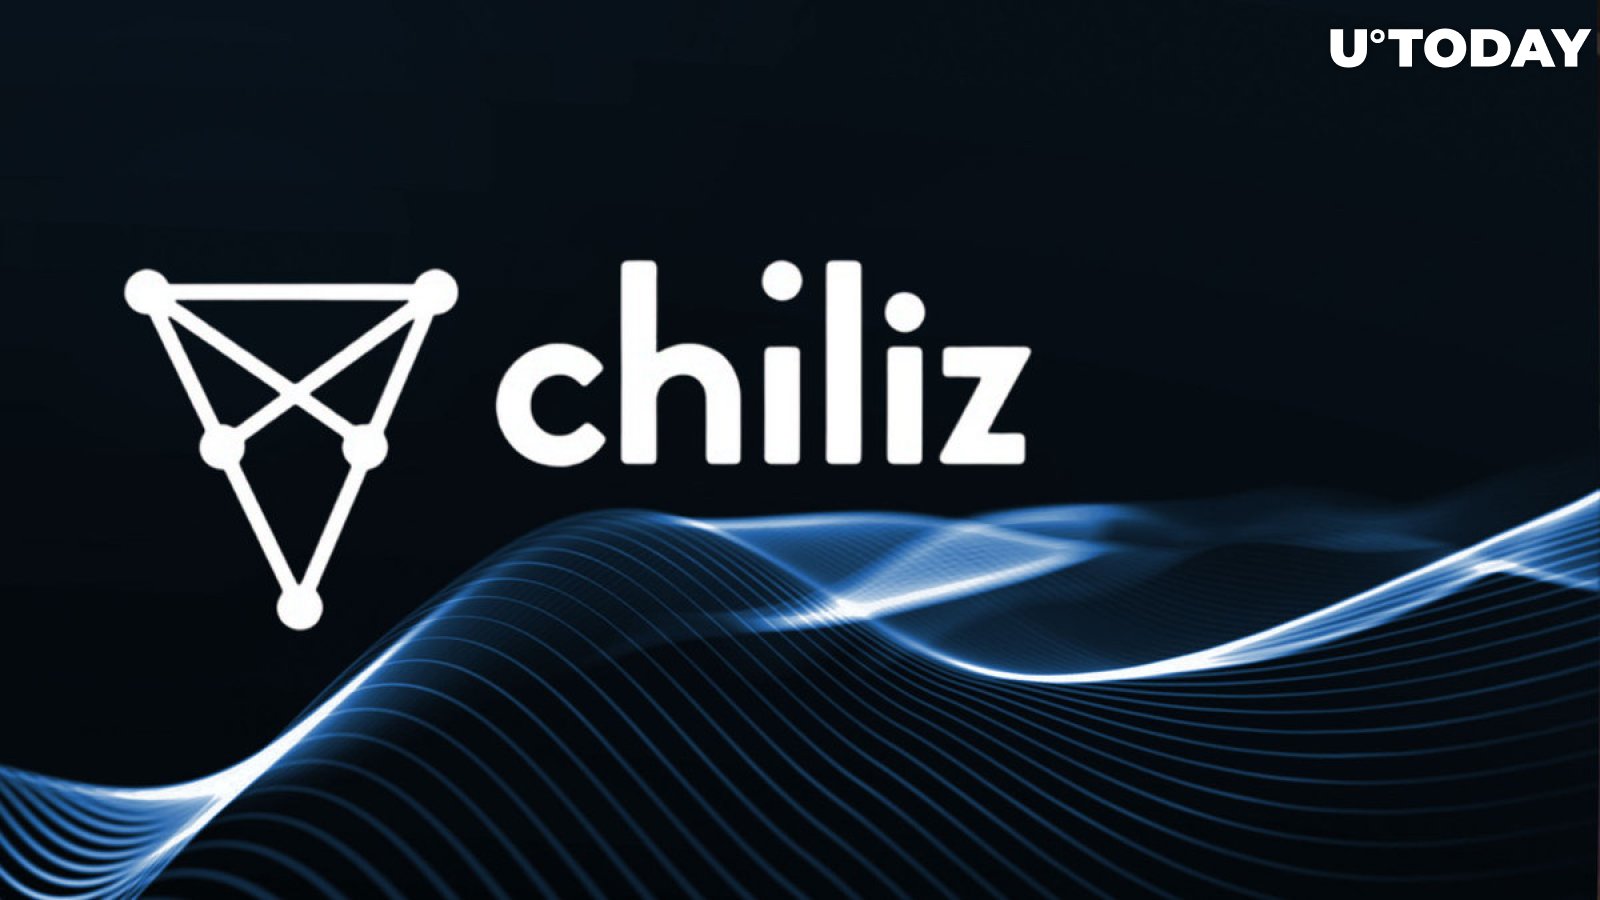 Chiliz 2.0 Set to Debut, CEO Shares Excitement for New Features